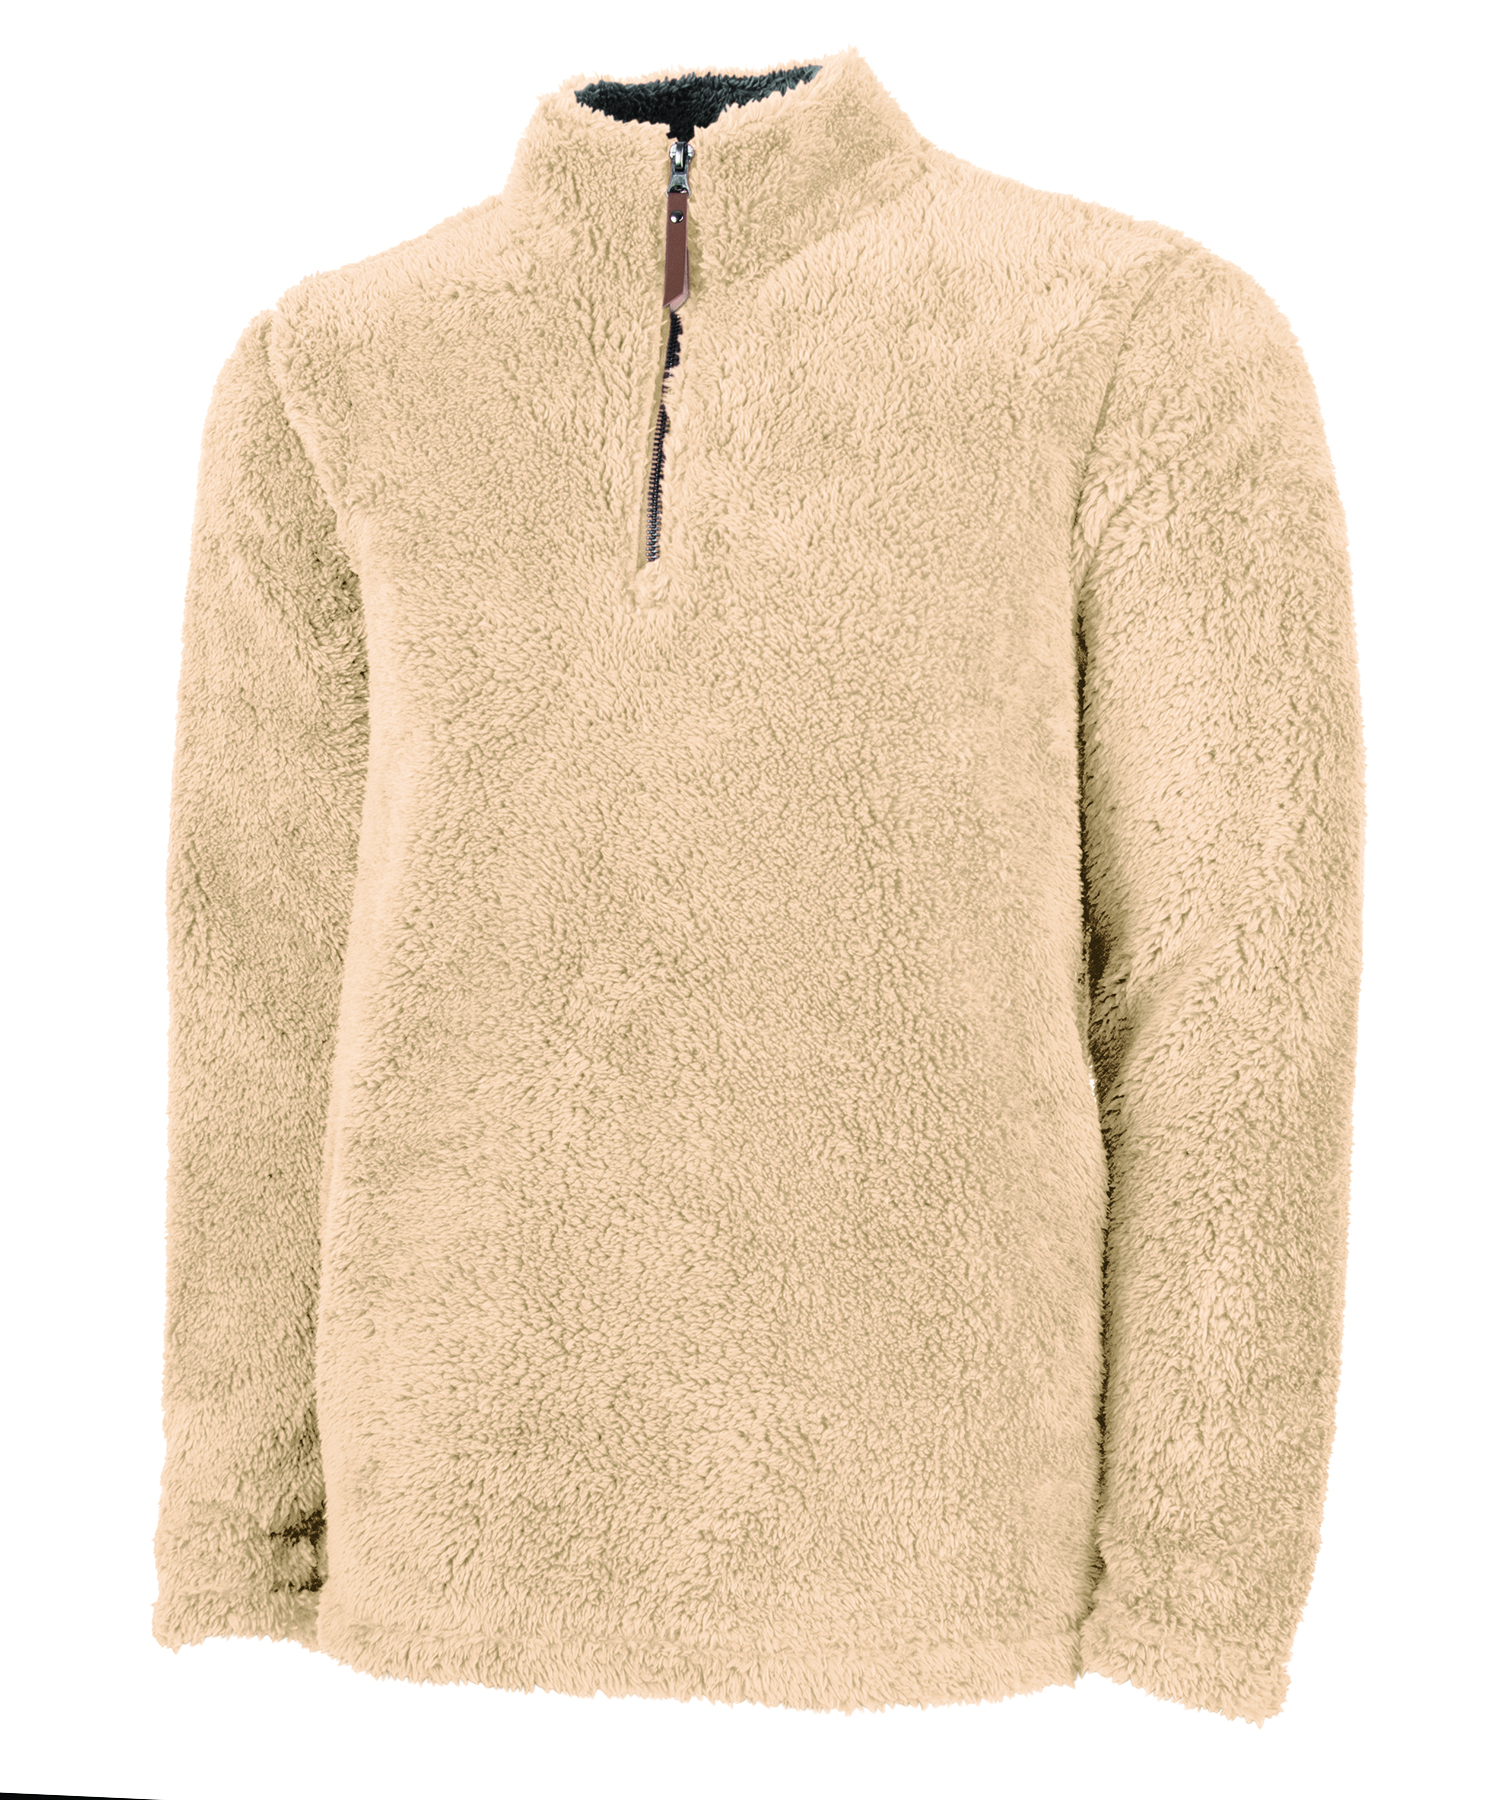 Charles River Apparel Men’s Newport Fleece Pullover Style 9876 Front Sand